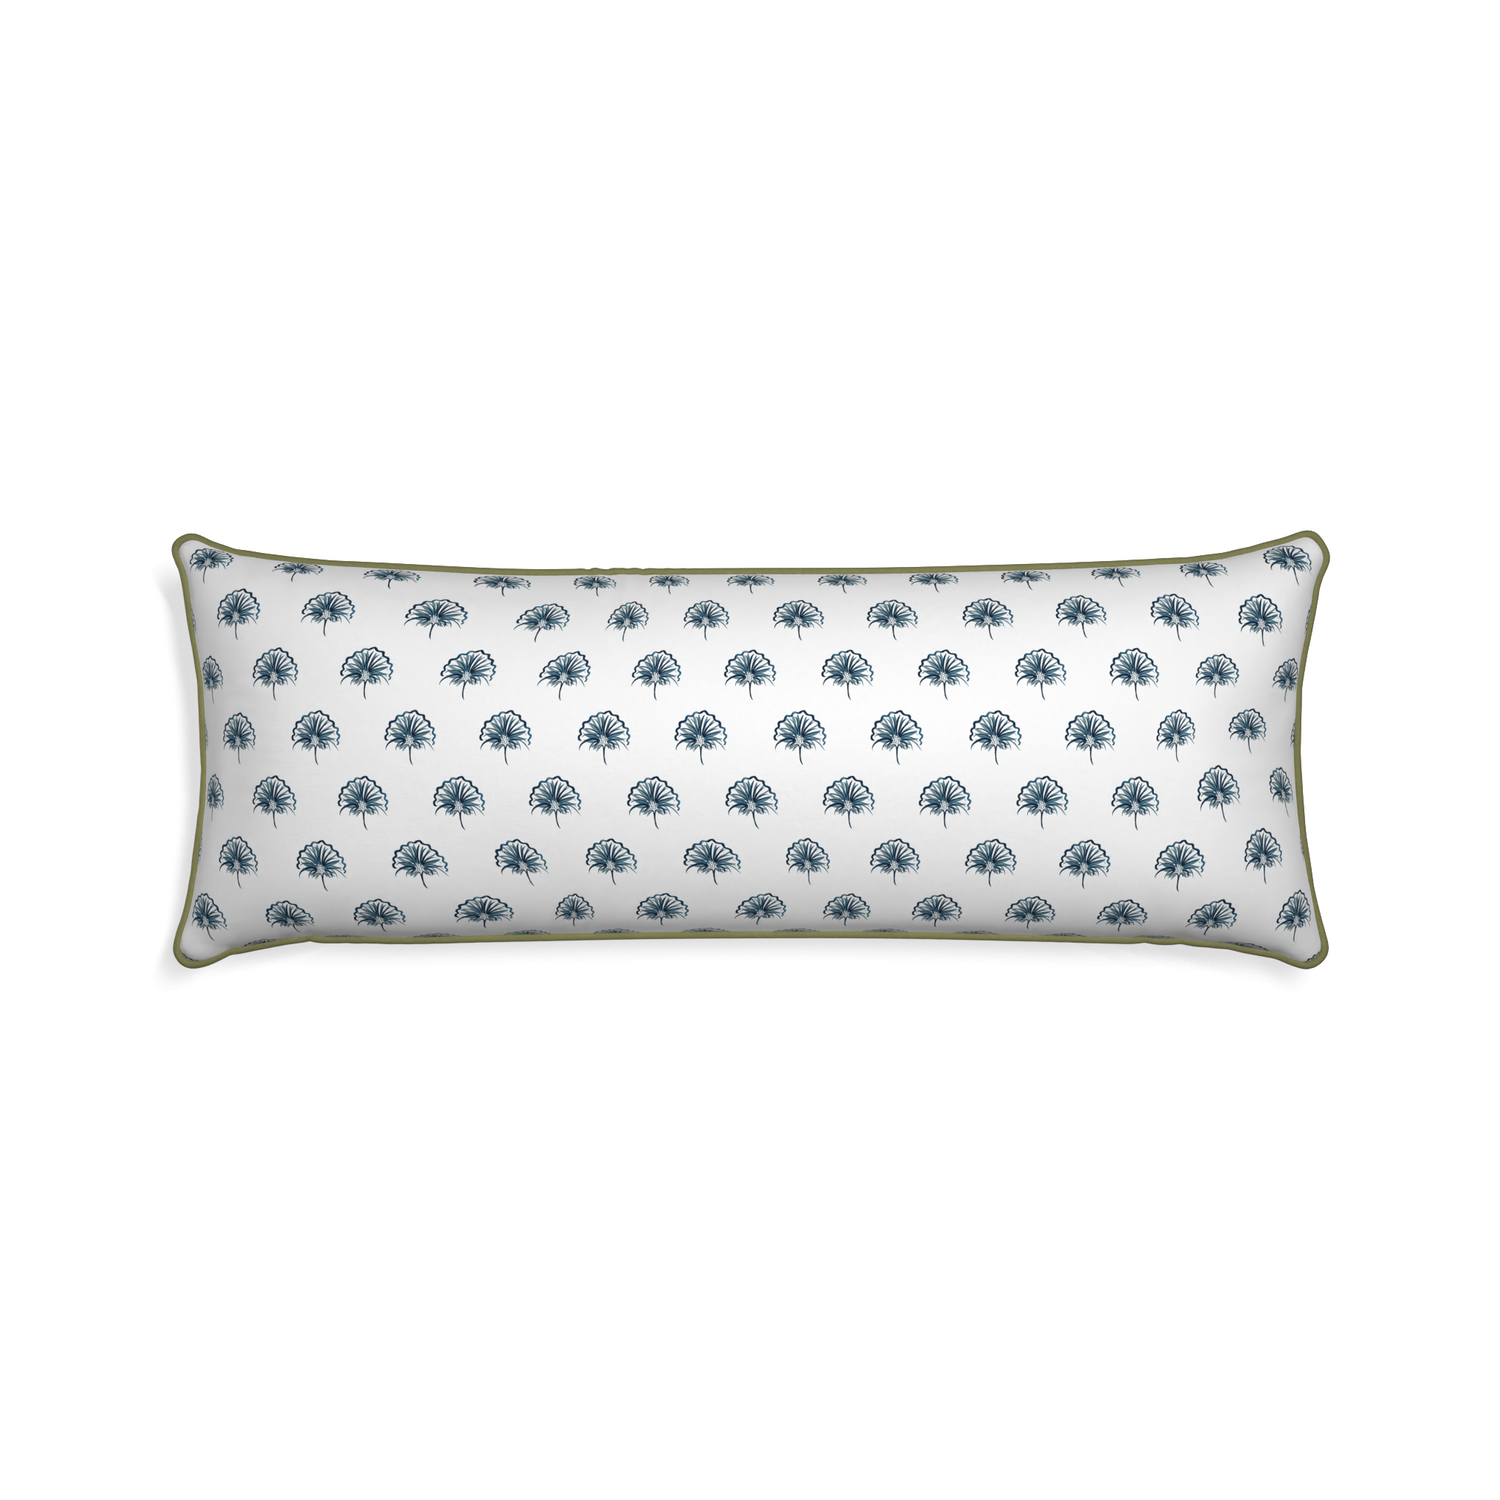 rectangle navy floral pillow with moss green piping